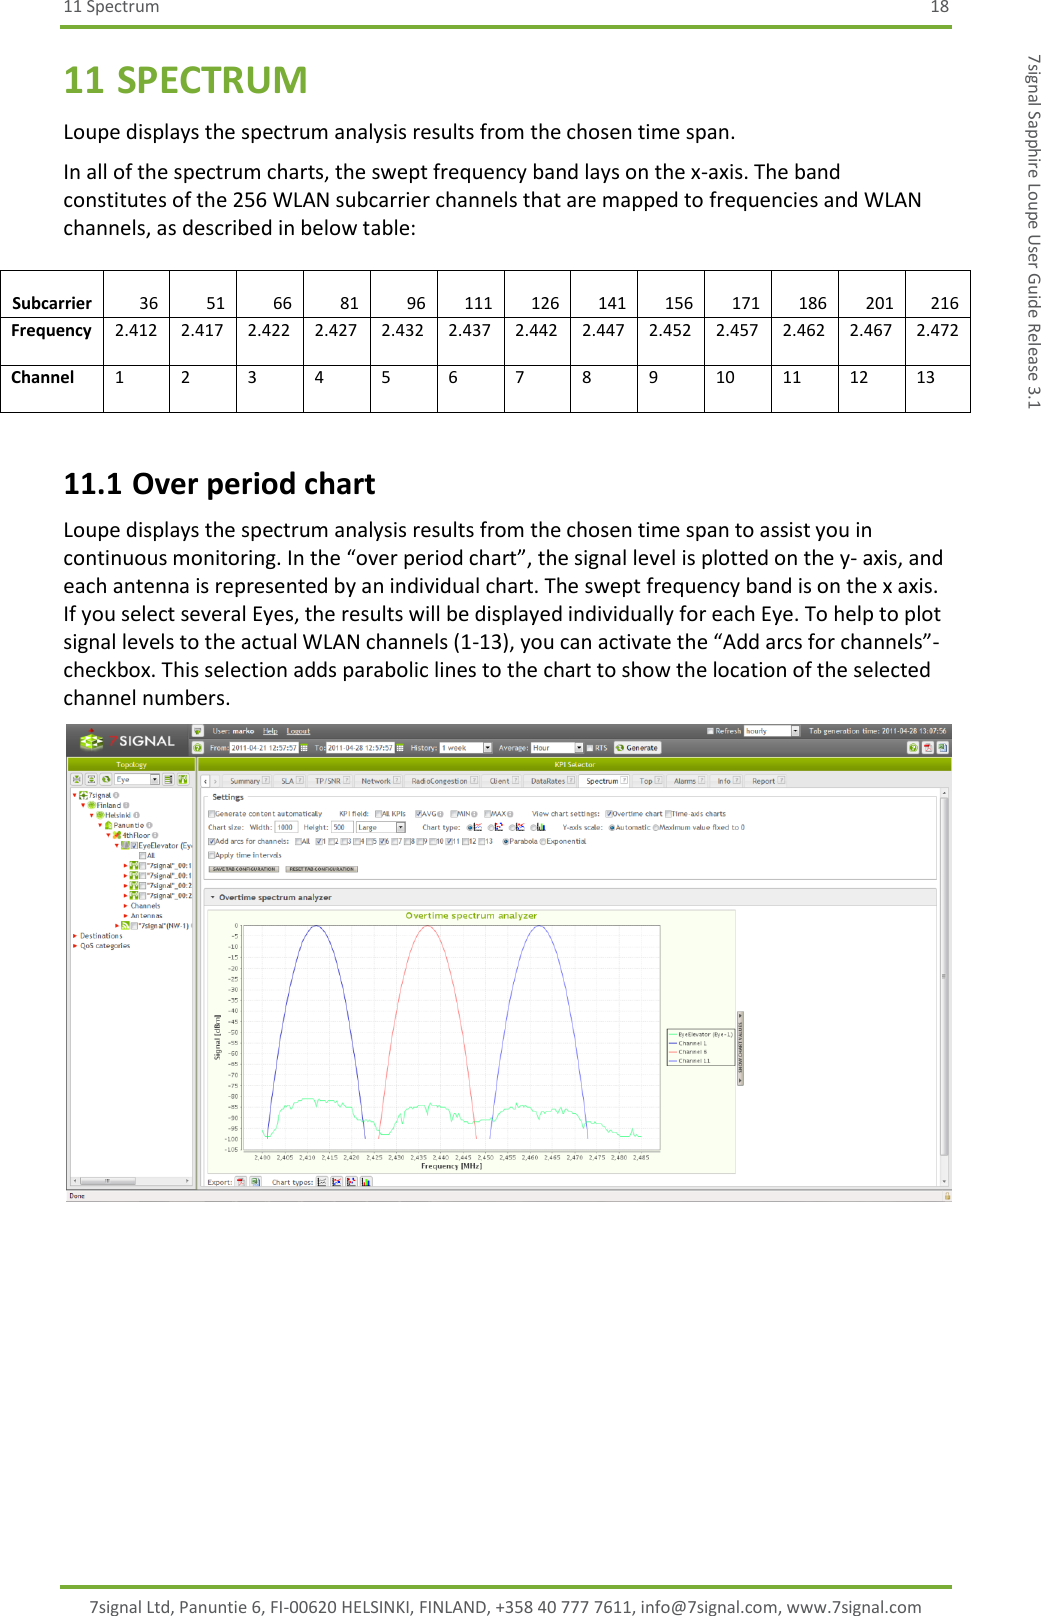 11 Spectrum  18 7signal Ltd, Panuntie 6, FI-00620 HELSINKI, FINLAND, +358 40 777 7611, info@7signal.com, www.7signal.com 7signal Sapphire Loupe User Guide Release 3.1 11 SPECTRUM Loupe displays the spectrum analysis results from the chosen time span. In all of the spectrum charts, the swept frequency band lays on the x-axis. The band constitutes of the 256 WLAN subcarrier channels that are mapped to frequencies and WLAN channels, as described in below table:   Subcarrier  36 51 66 81 96 111 126 141 156 171 186 201 216 Frequency  2.412 2.417 2.422 2.427 2.432 2.437 2.442 2.447 2.452 2.457 2.462 2.467 2.472 Channel 1 2 3 4 5 6 7 8 9 10 11 12 13 11.1 Over period chart Loupe displays the spectrum analysis results from the chosen time span to assist you in continuous monitoring. In the “over period chart”, the signal level is plotted on the y- axis, and each antenna is represented by an individual chart. The swept frequency band is on the x axis. If you select several Eyes, the results will be displayed individually for each Eye. To help to plot signal levels to the actual WLAN channels (1-13), you can activate the “Add arcs for channels”-checkbox. This selection adds parabolic lines to the chart to show the location of the selected channel numbers.      